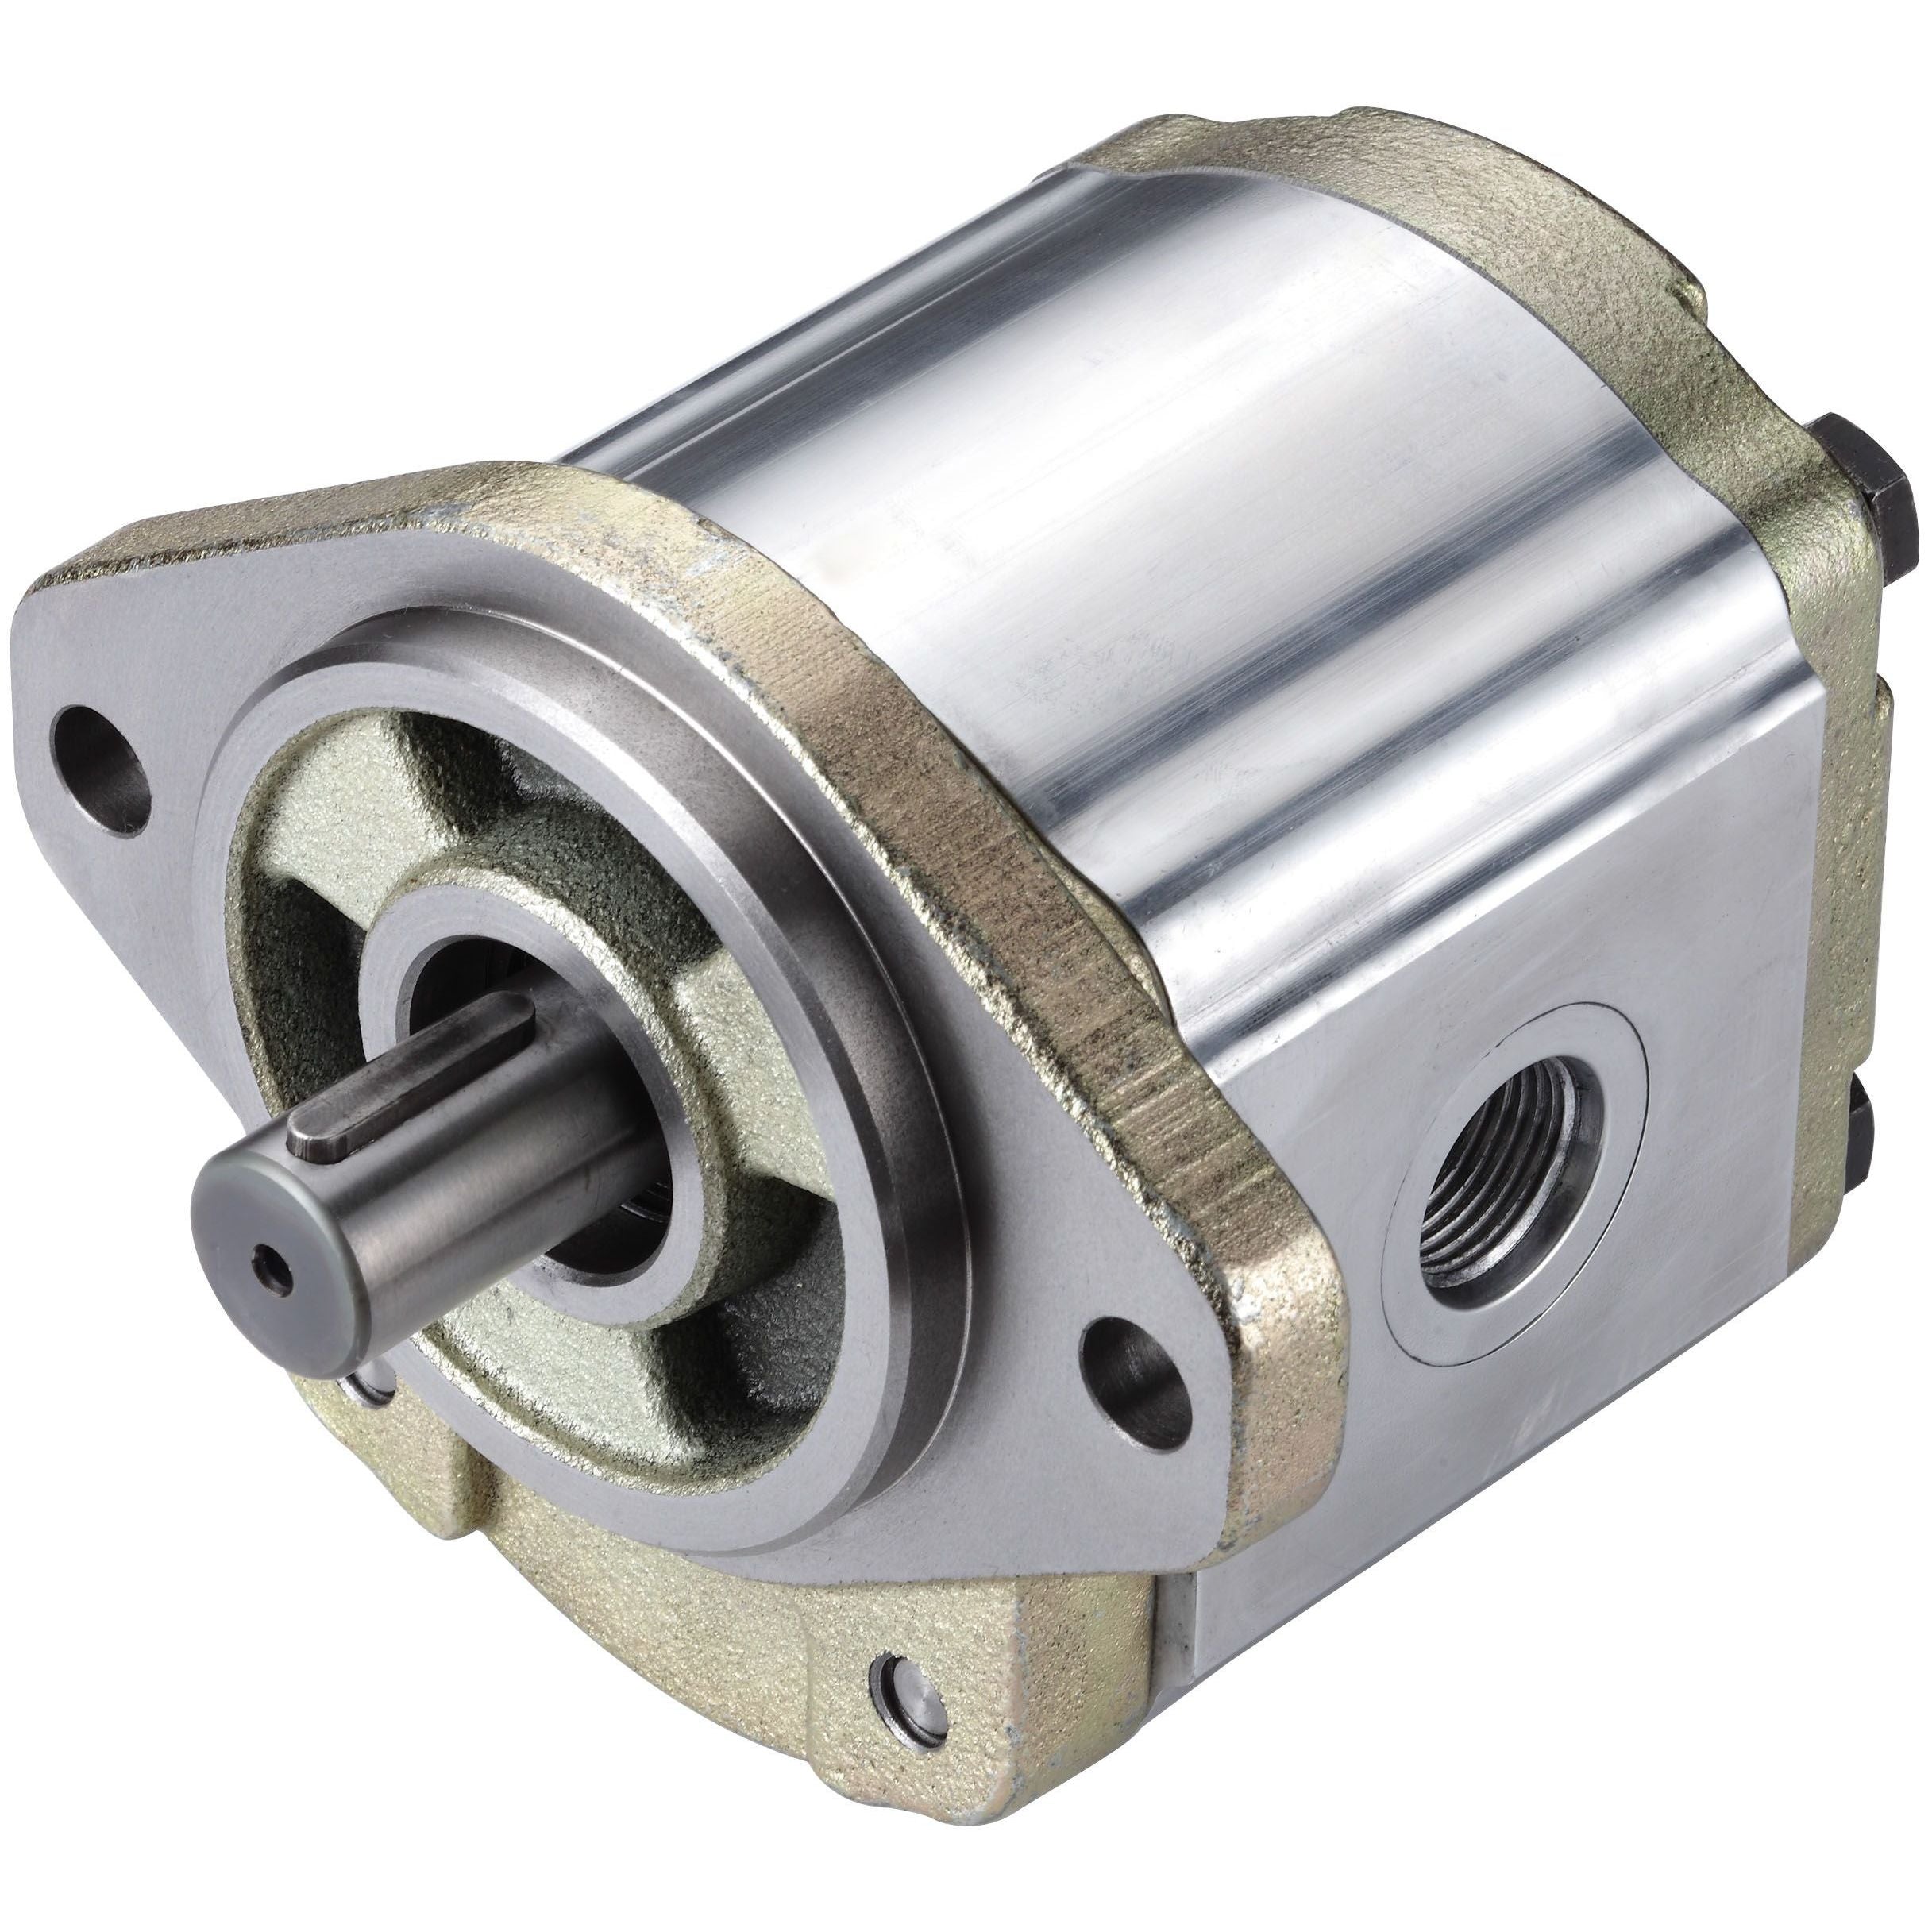 3GA5U128L : Honor Gear Pump, CCW Rotation, 28cc (1.71in3), 13.31 GPM, 3500psi, 3000 RPM, #16 SAE (1") In, #12 SAE (3/4") Out, Splined Shaft 11-Tooth, 16/32 Pitch, SAE A 2-Bolt Mount